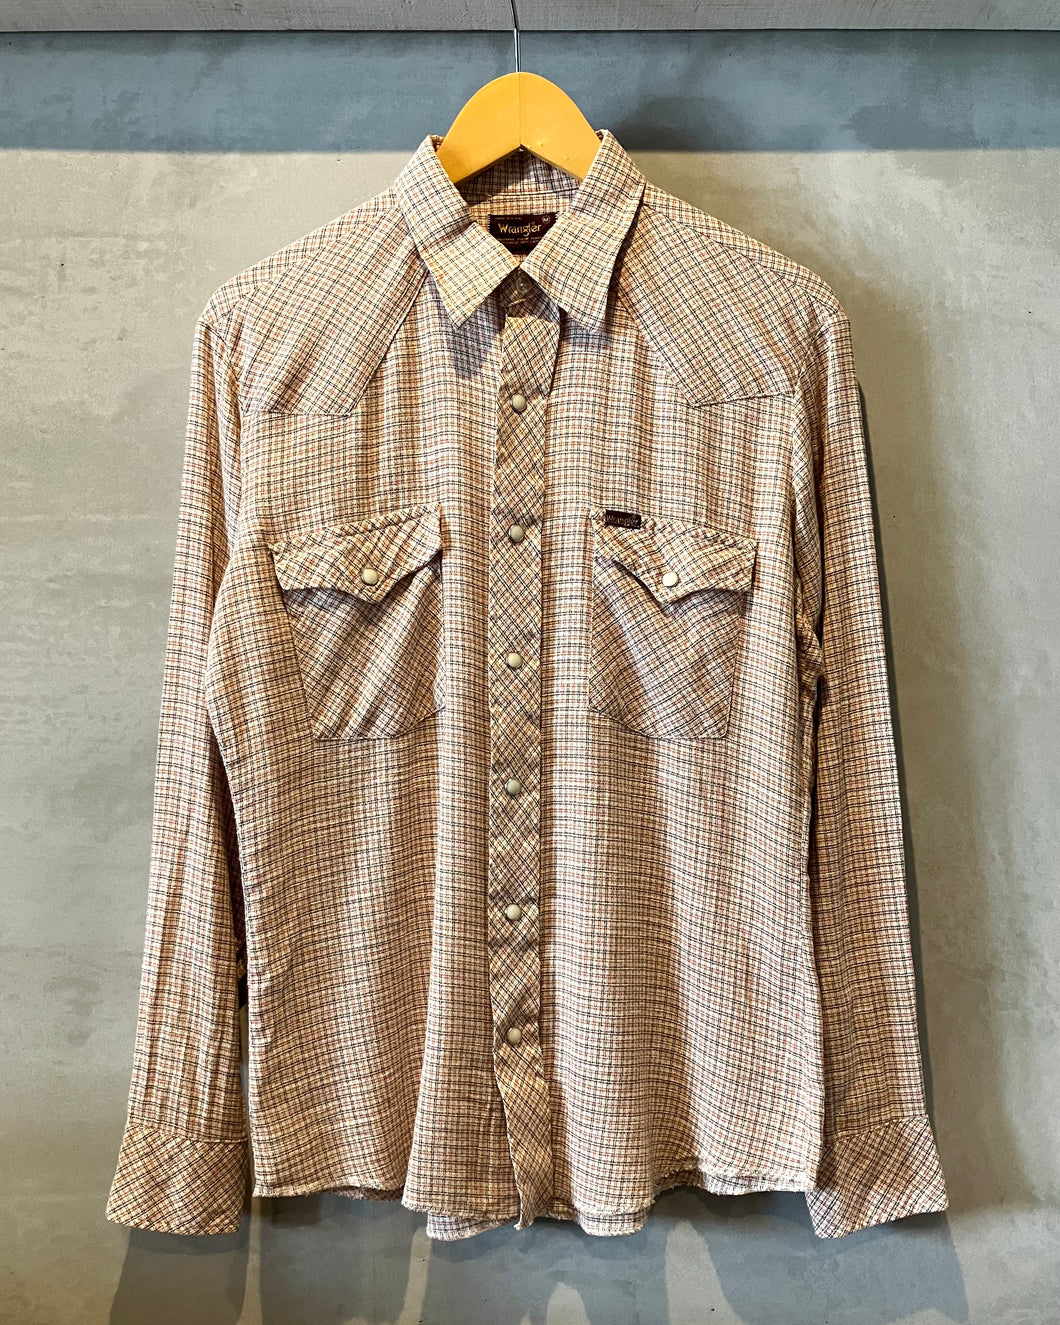 Wrangler-L/S shirt-(size M)Made in U.S.A.